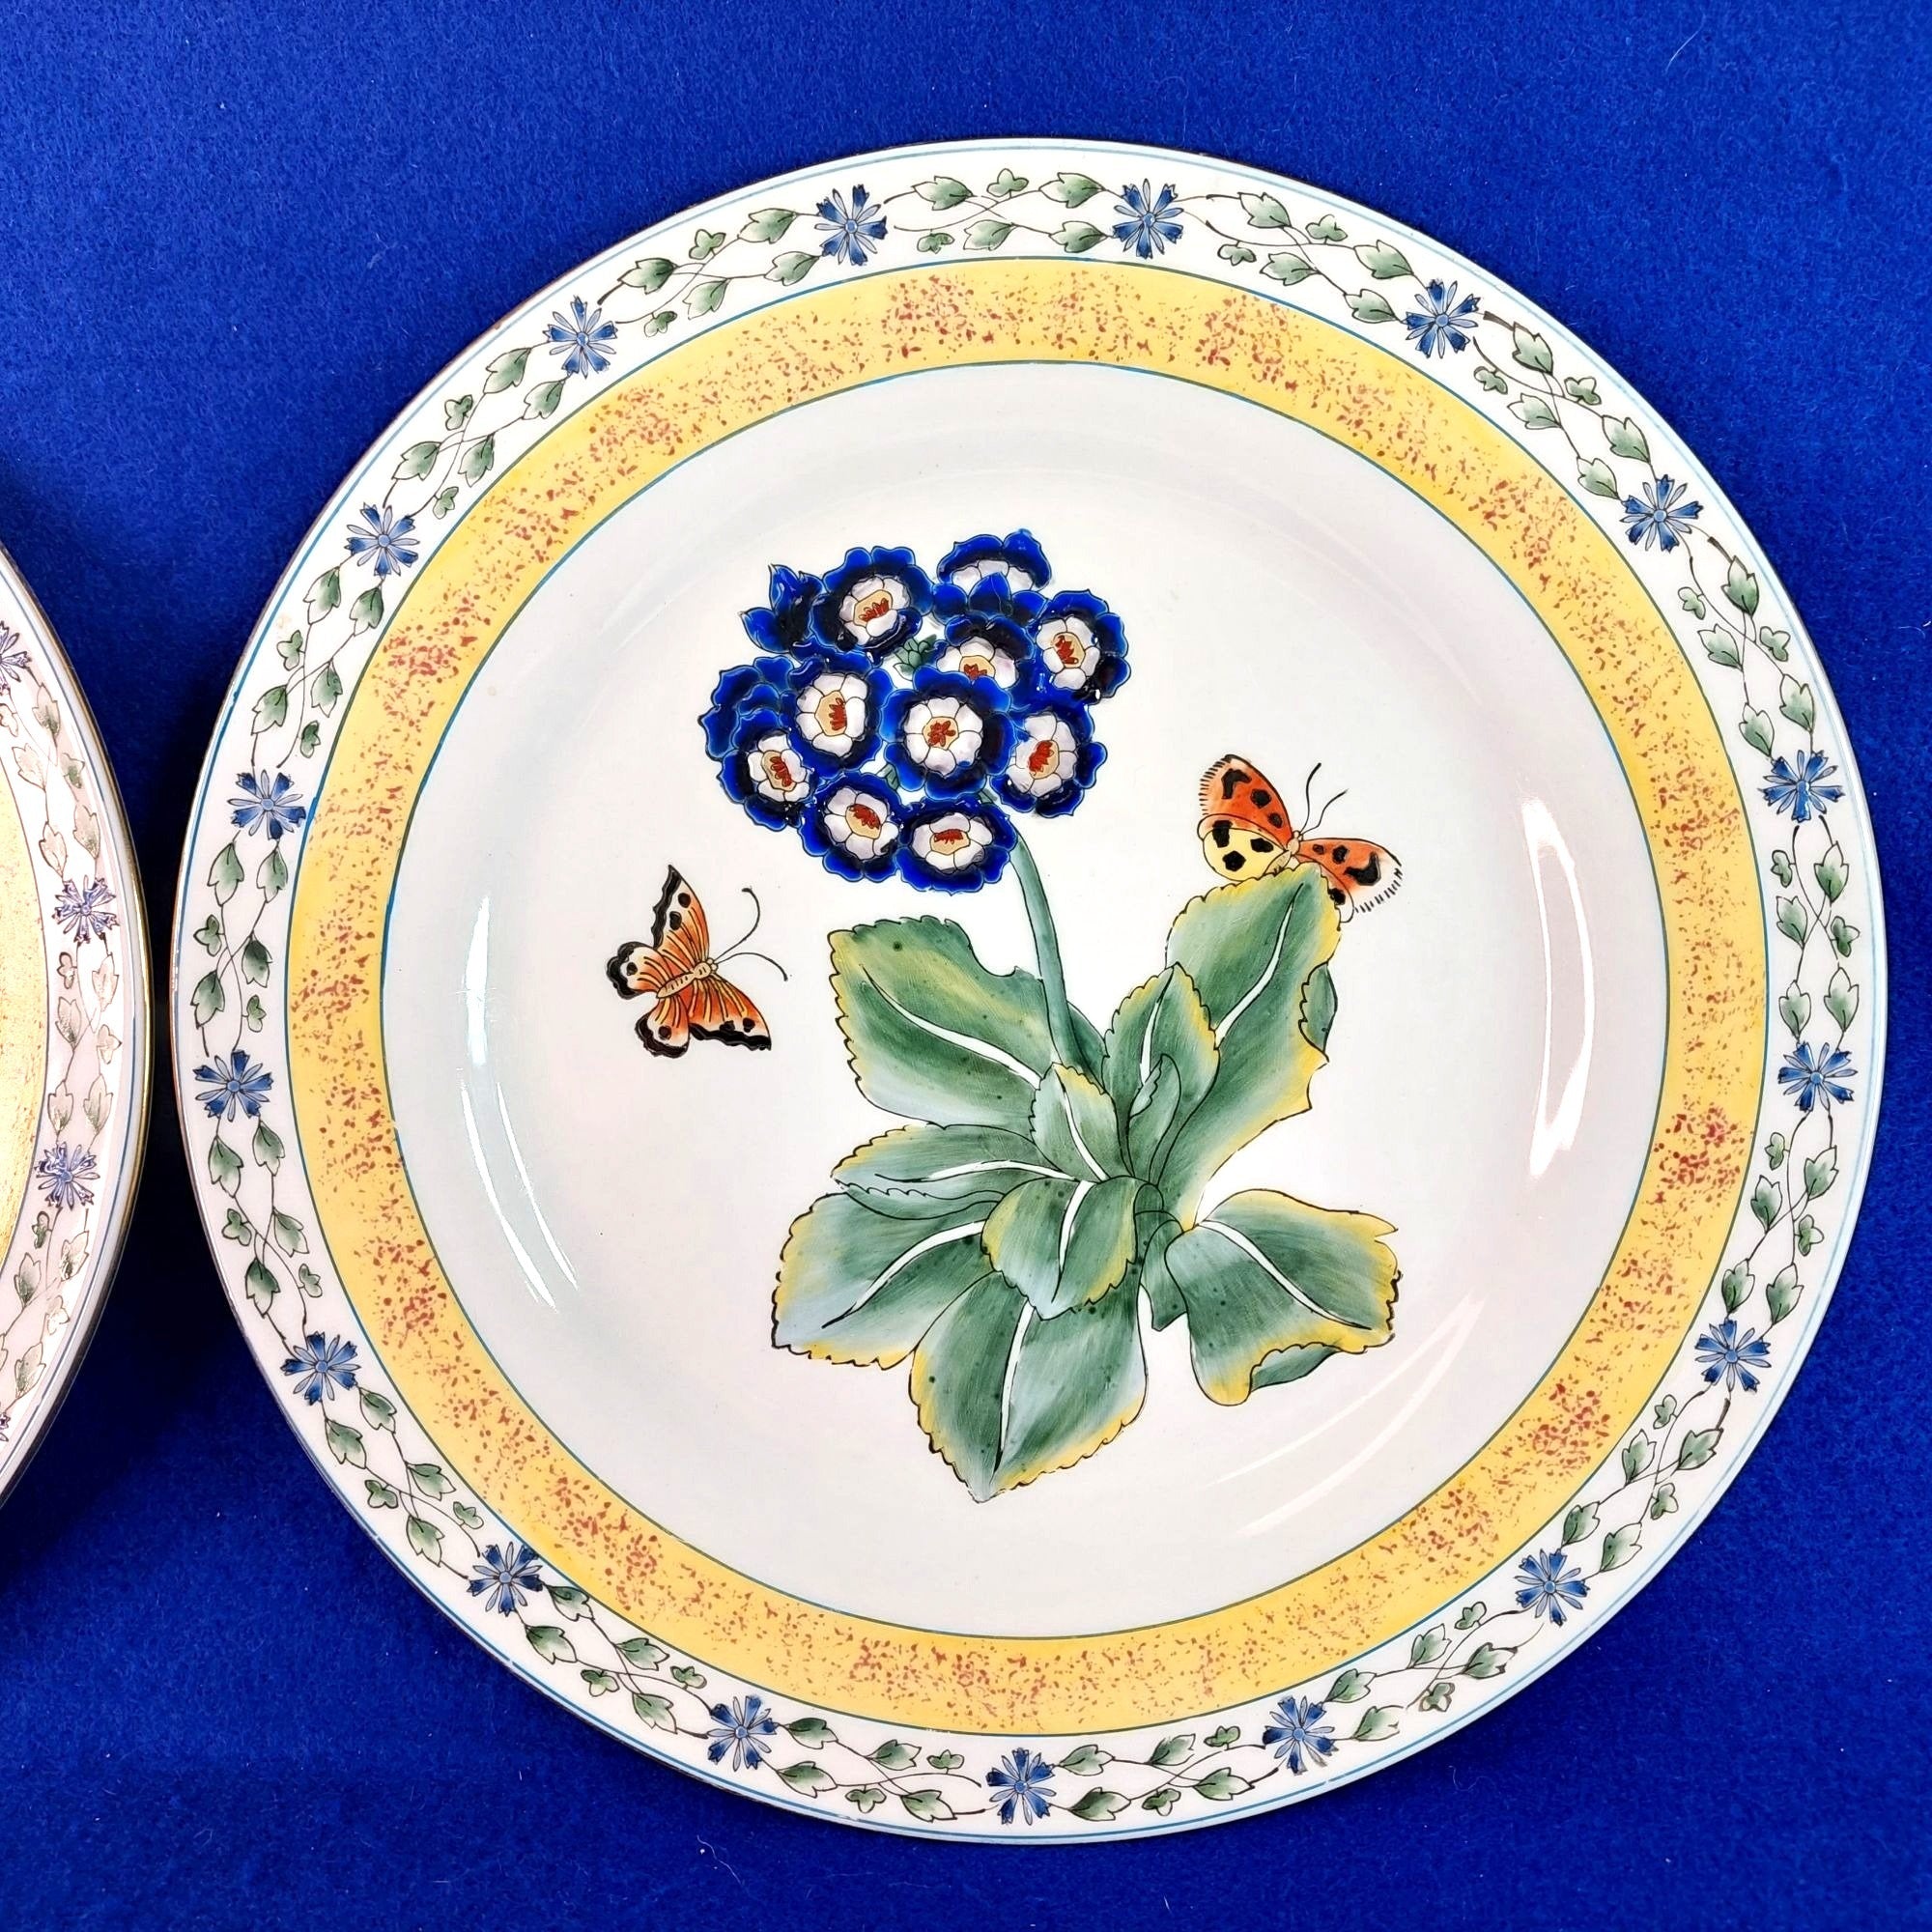 Decorative Plate Flower Butterfly Motif Raised Beaded ACCENT Vintage 2 pc set